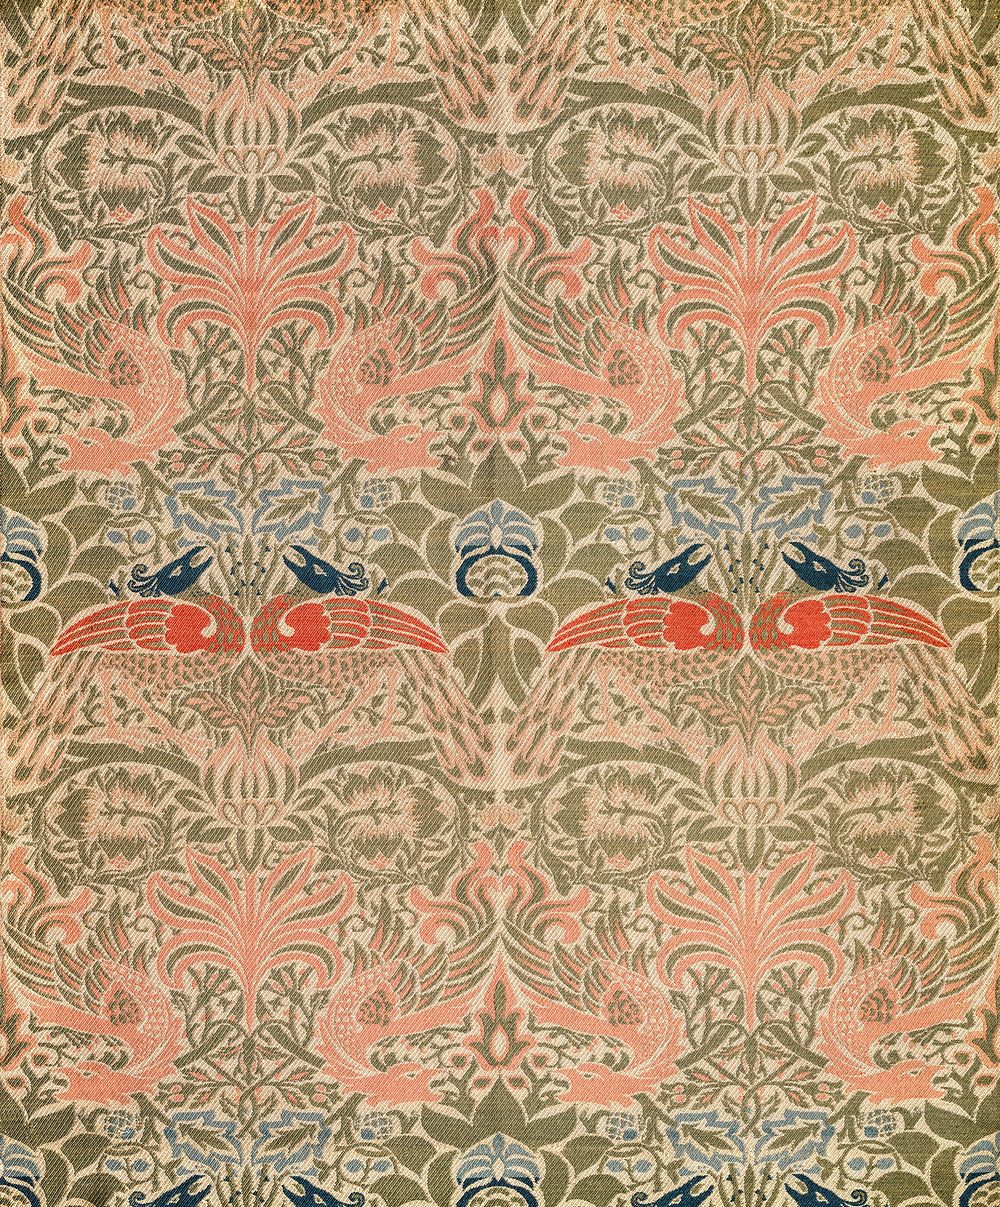 William Morris's Peacock and Dragon (1878) famous pattern. Original from The Cleveland Museum of Art. Digitally enhanced by…